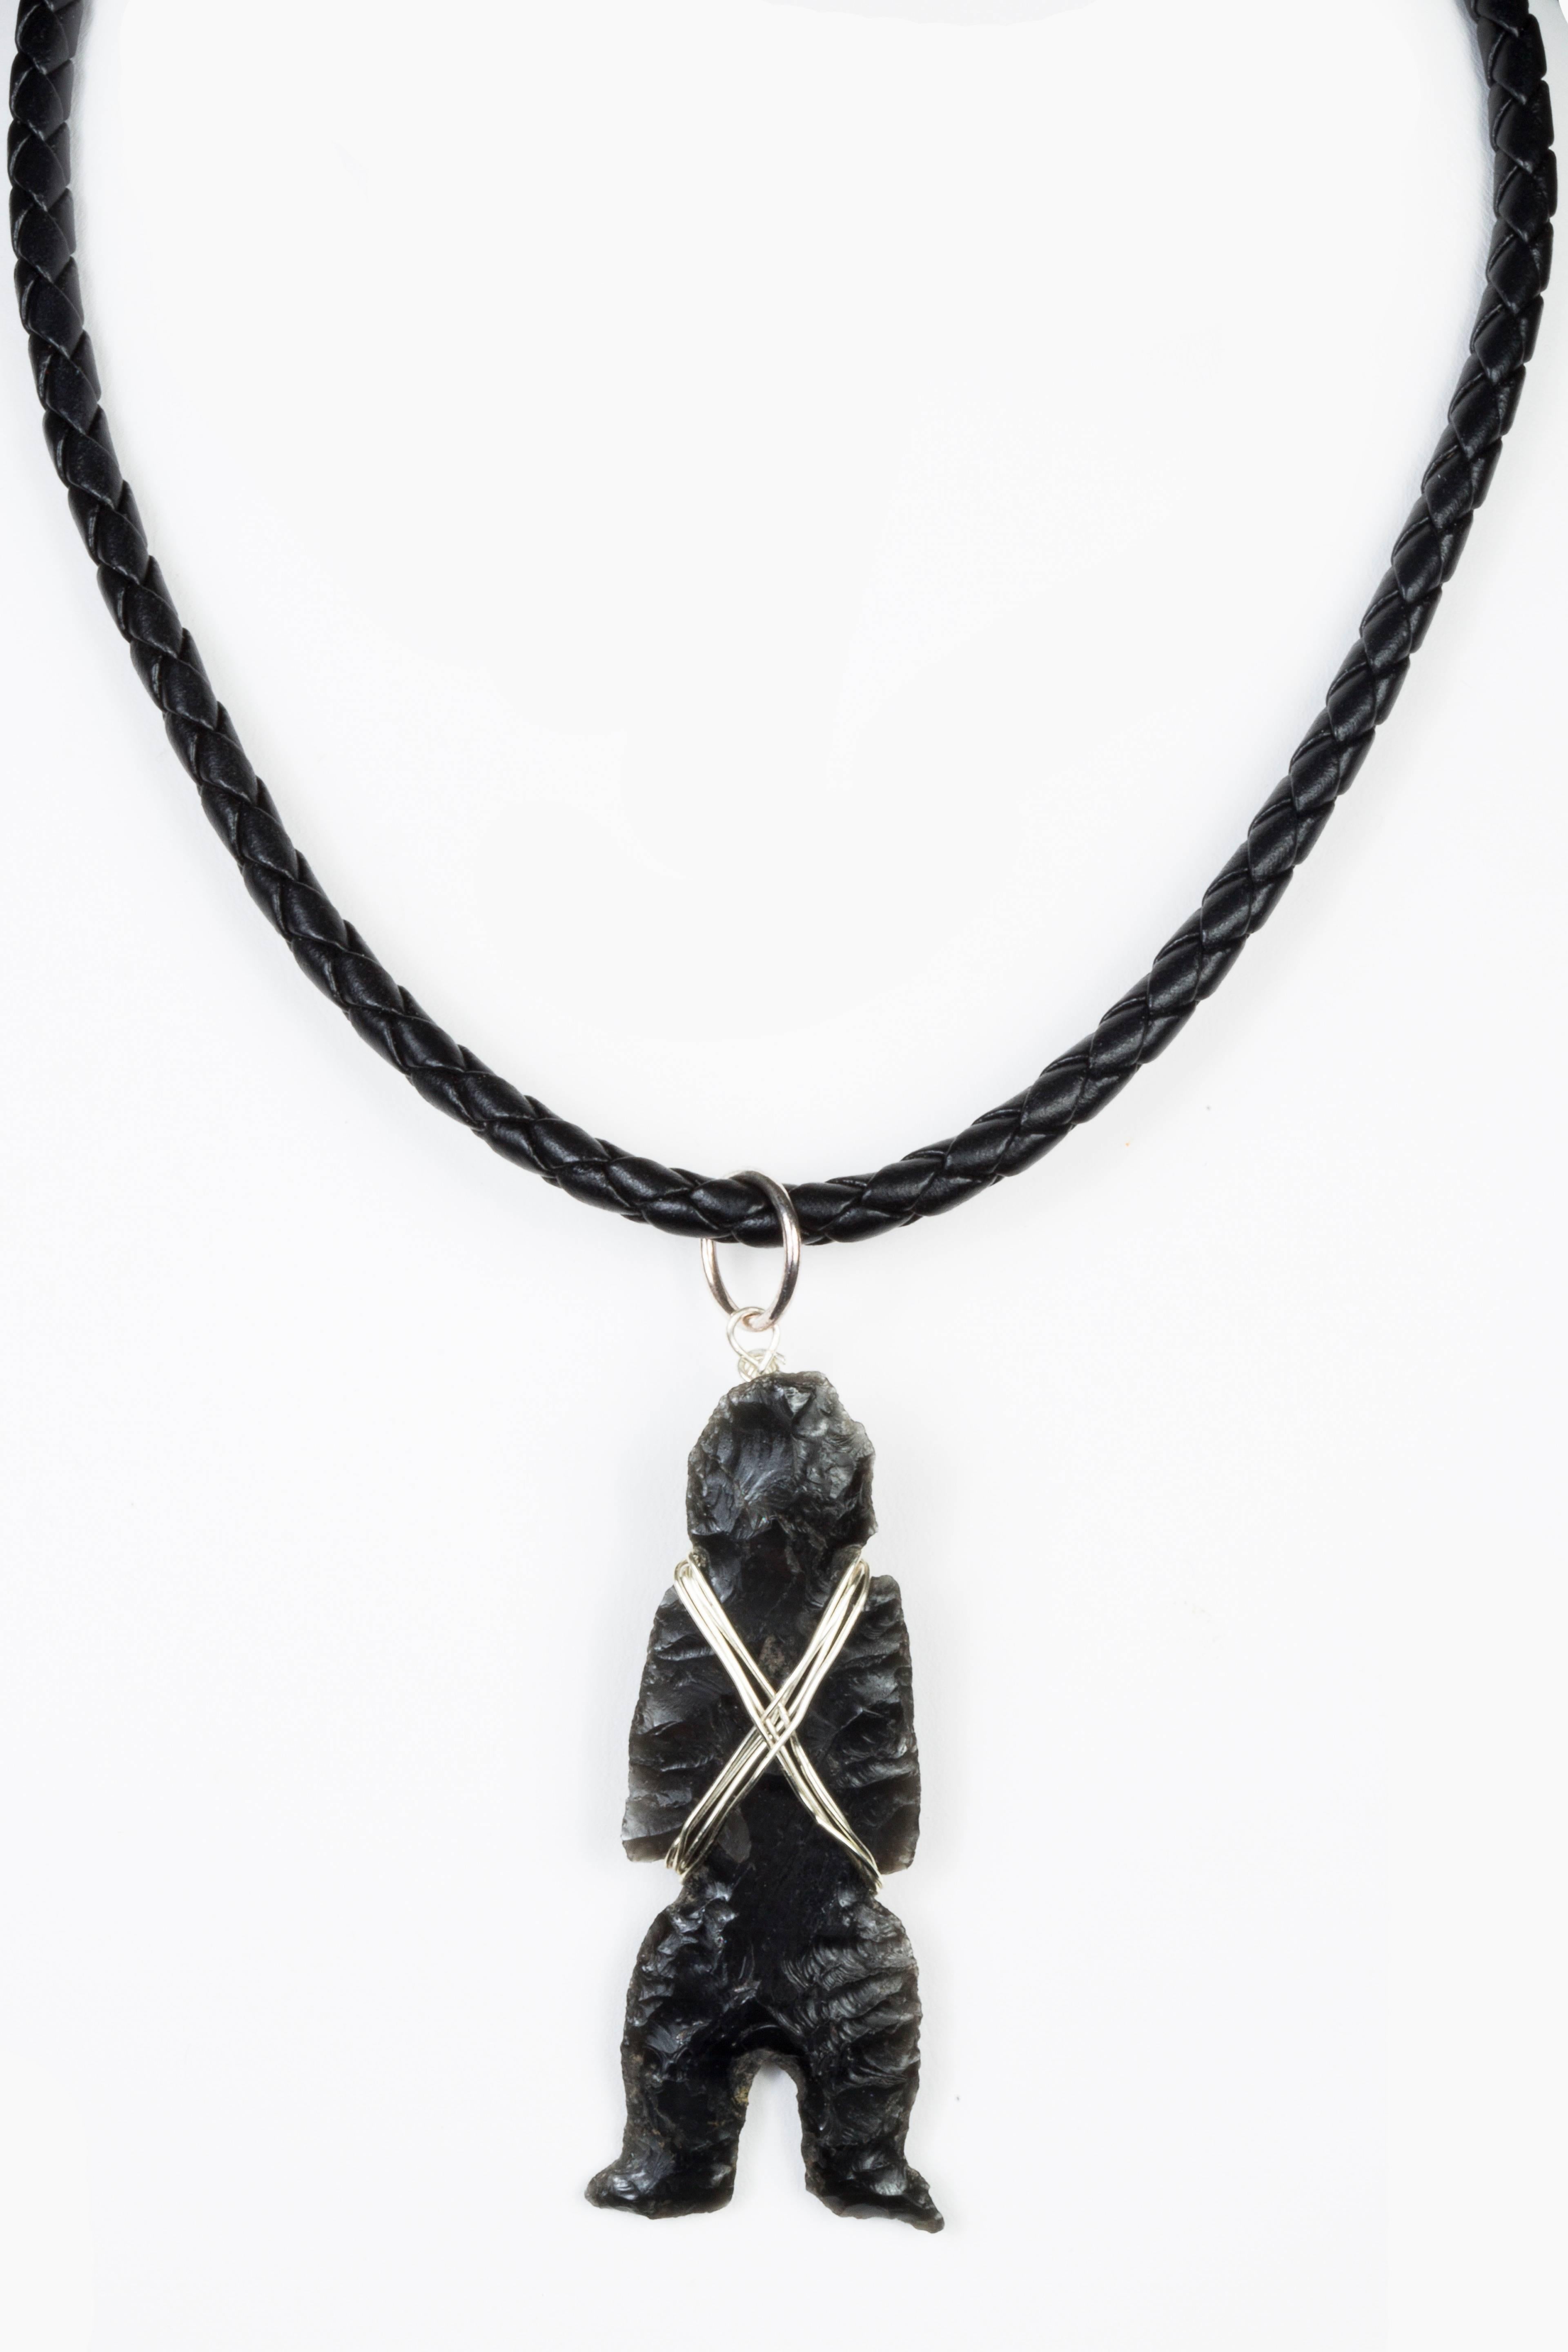 This Aztec Flint Ca. 1300-1521 CE has been carved by hand to represent a shaman. Provenance: Pierre and Tana Matisse Foundation. Modern new string and clasp.

This piece comes from our 